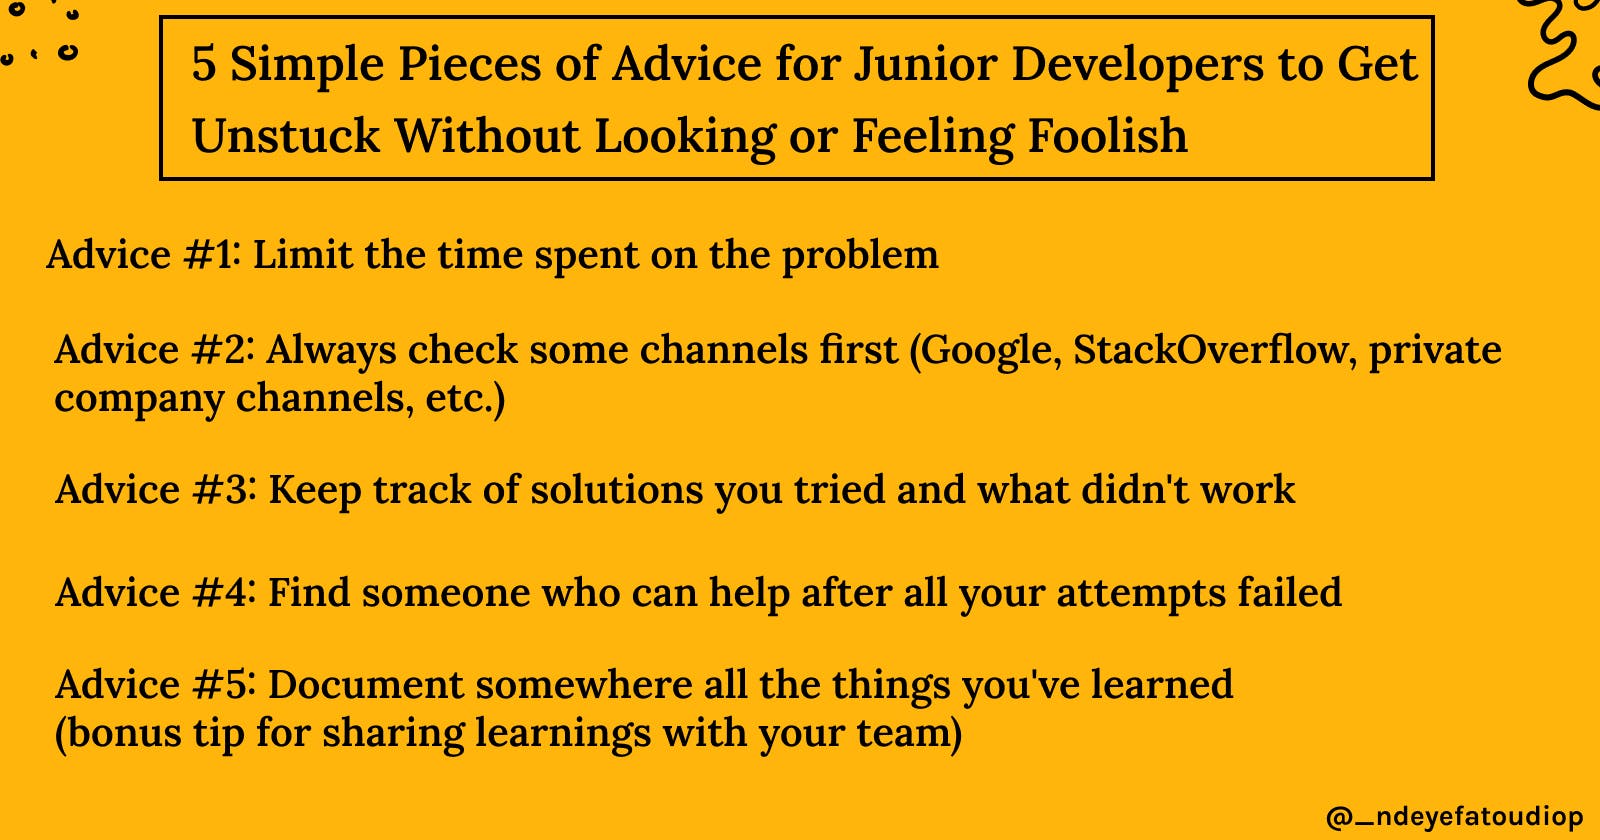 5 Simple Pieces of Advice for Junior Developers to Get Unstuck Without Looking Or Feeling Foolish 🙈